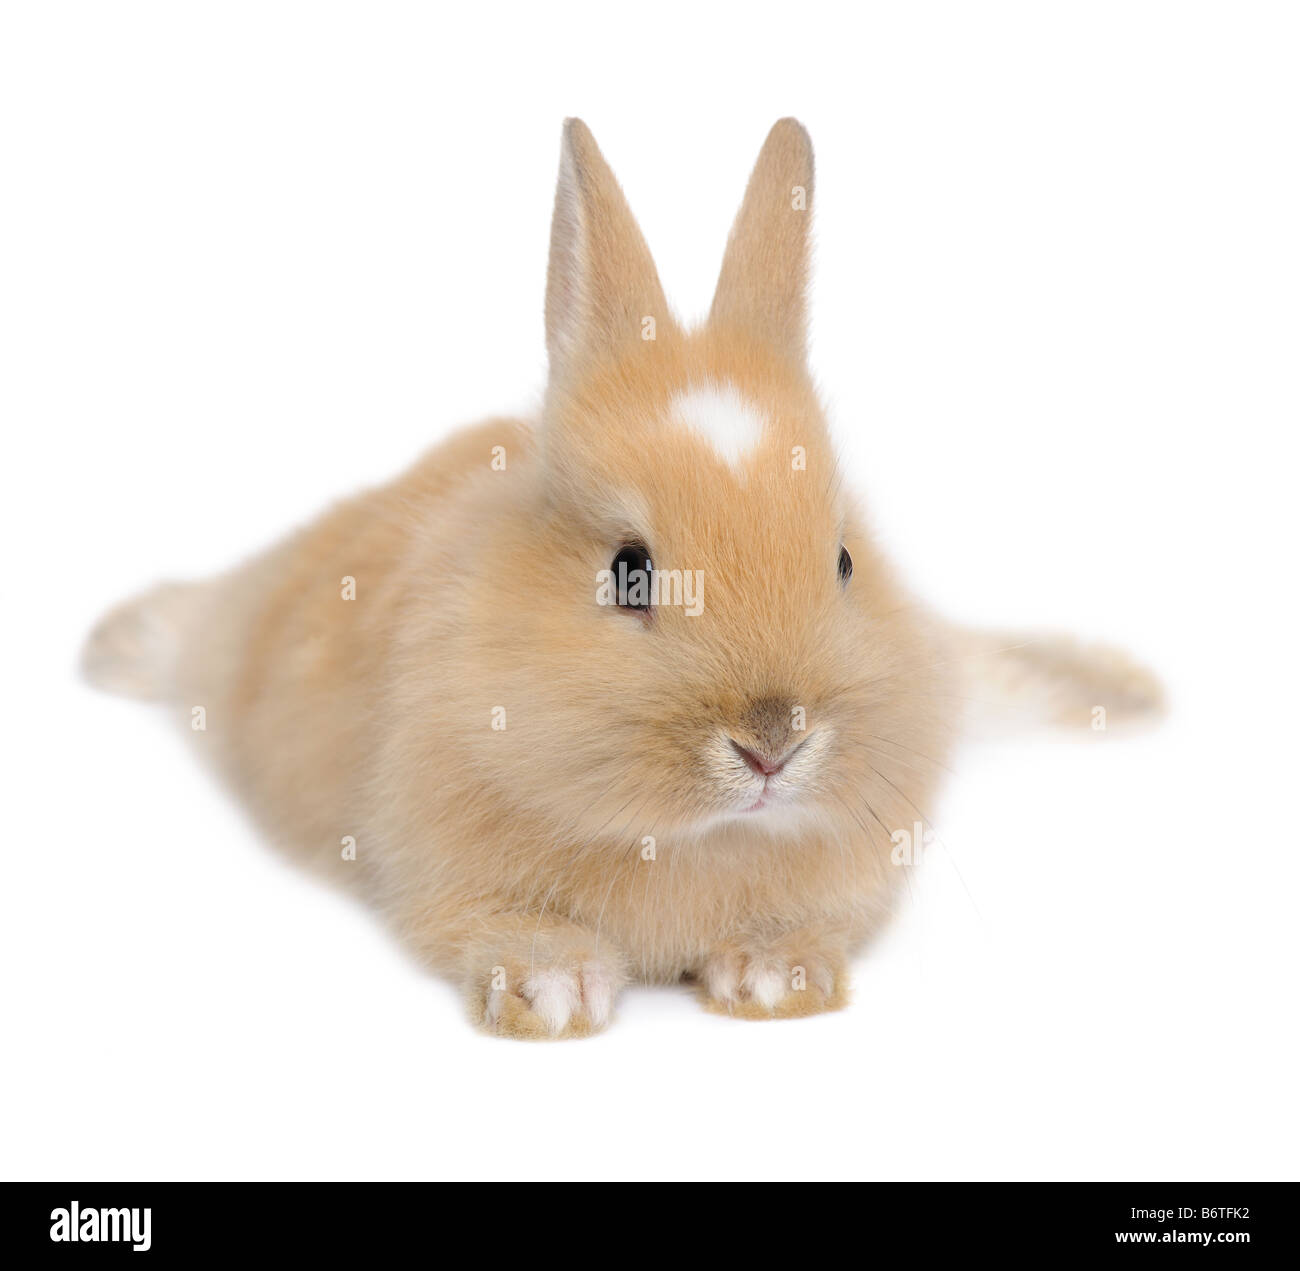 baby Rabbit in front of a white background Stock Photo